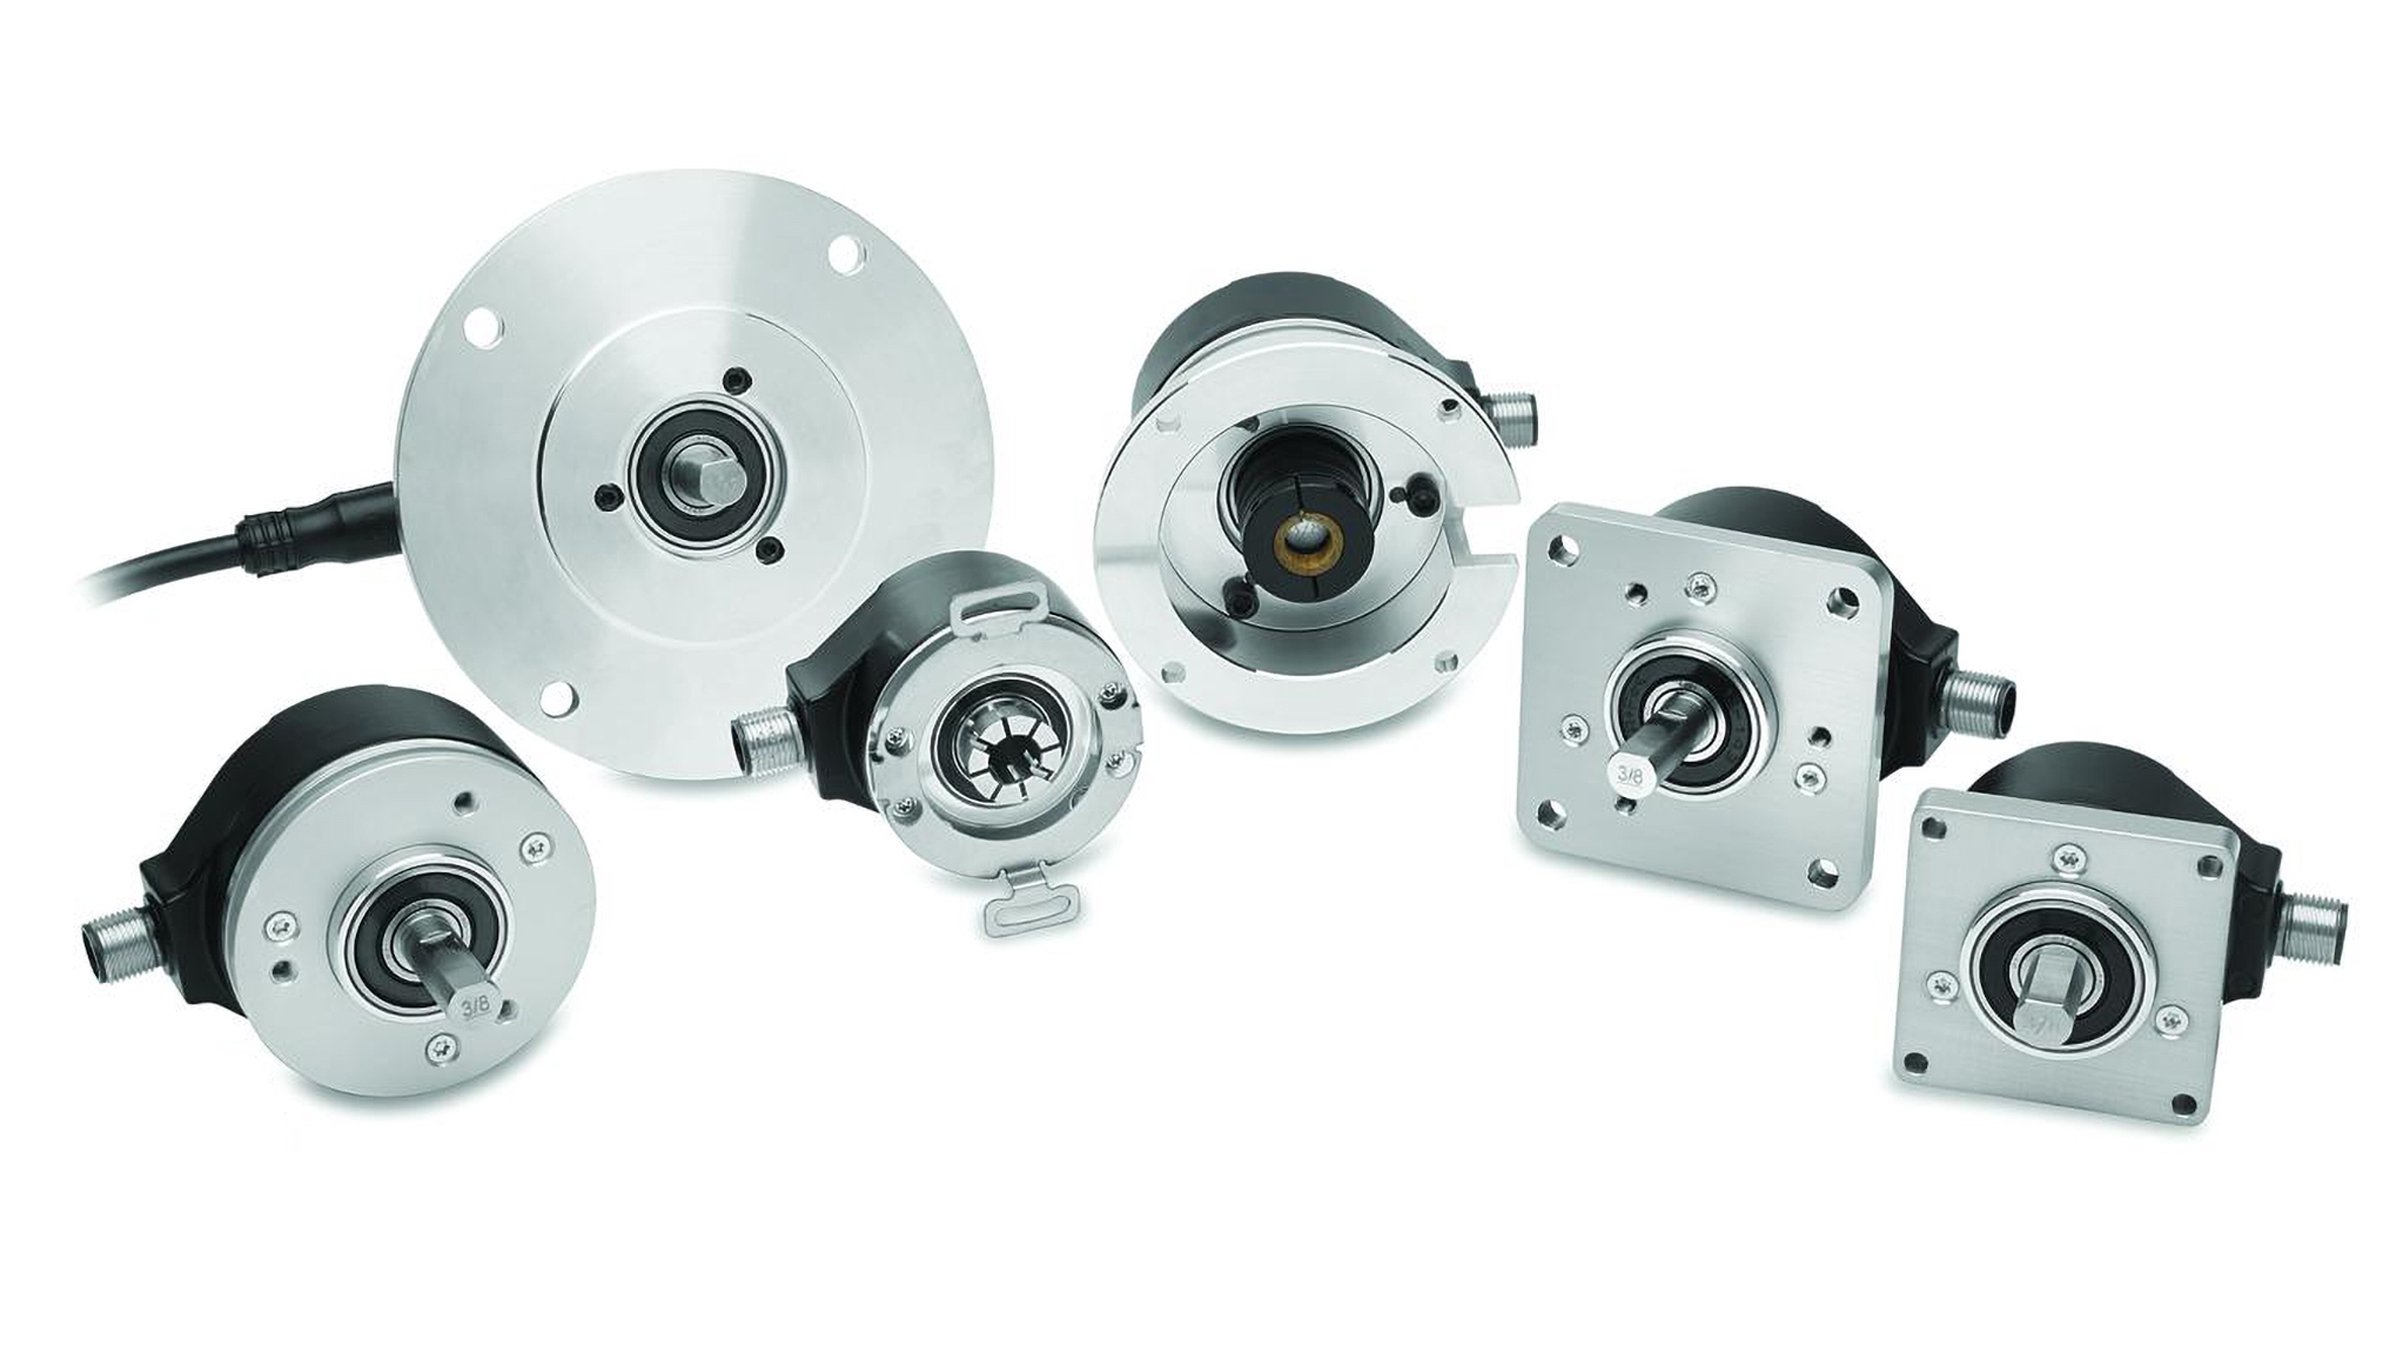 Allen‑Bradley Bulletin 847 High-resolution Incremental Optical Encoders feature a robust mechanical design and a metal code disk which provides a rugged bearing system that fits nearly all applications.